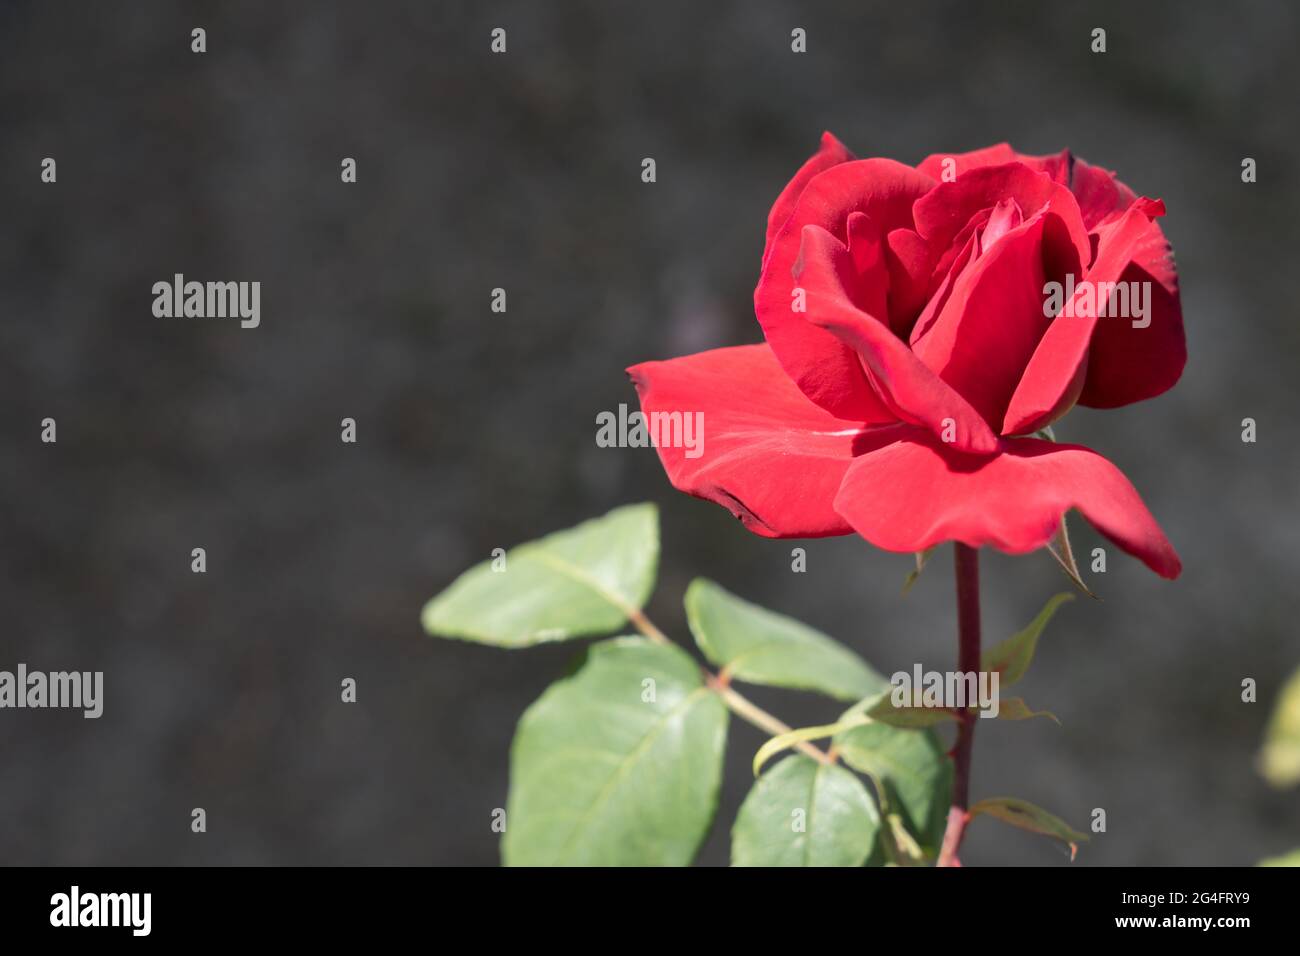 red rose blossom and dark background natural close-up Stock Photo